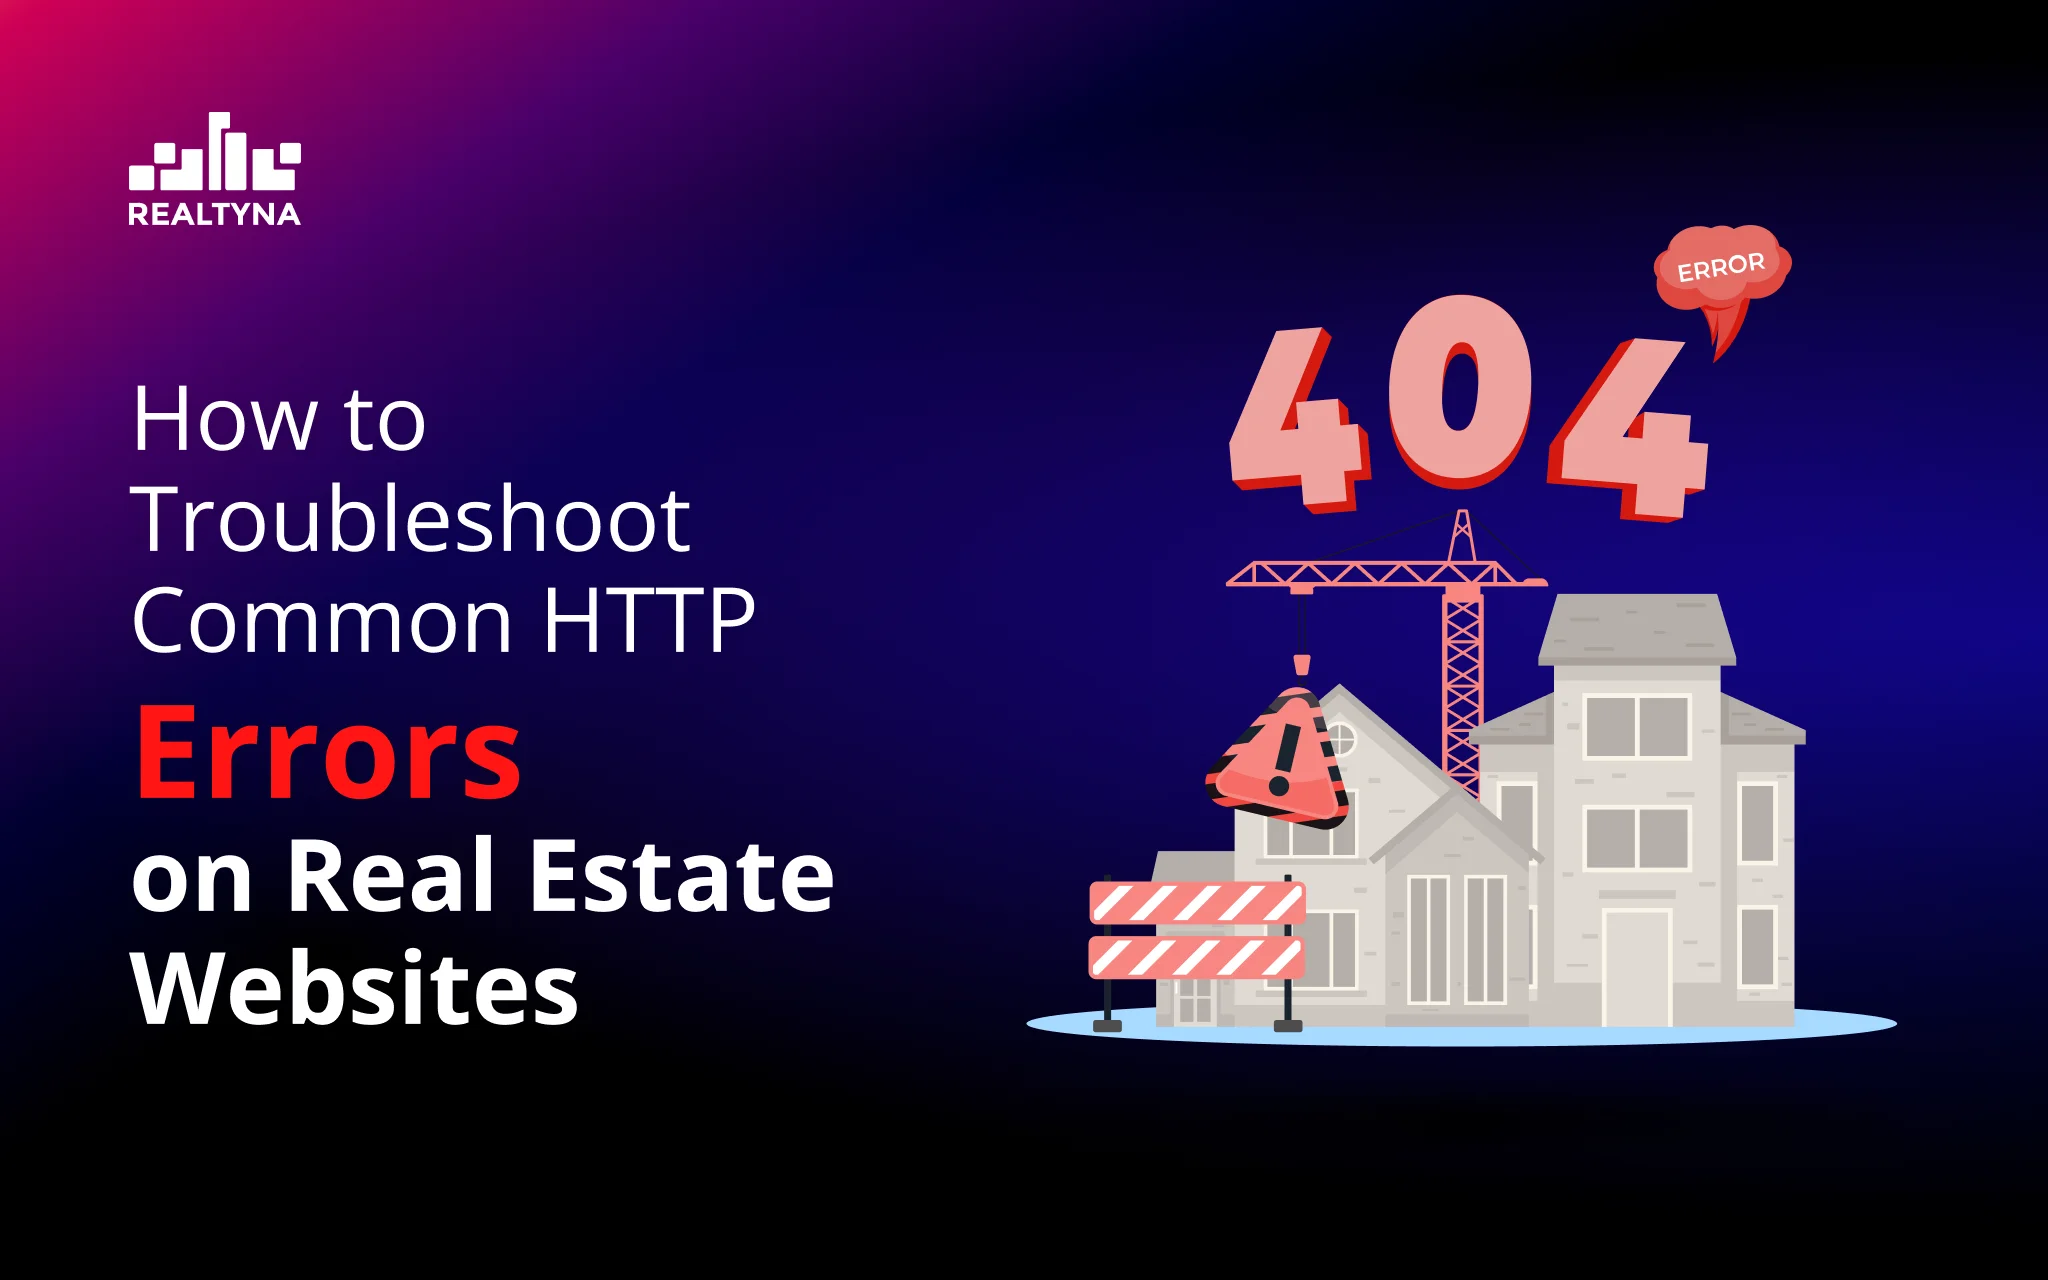 How to Troubleshoot Common HTTP Errors on Real Estate Websites